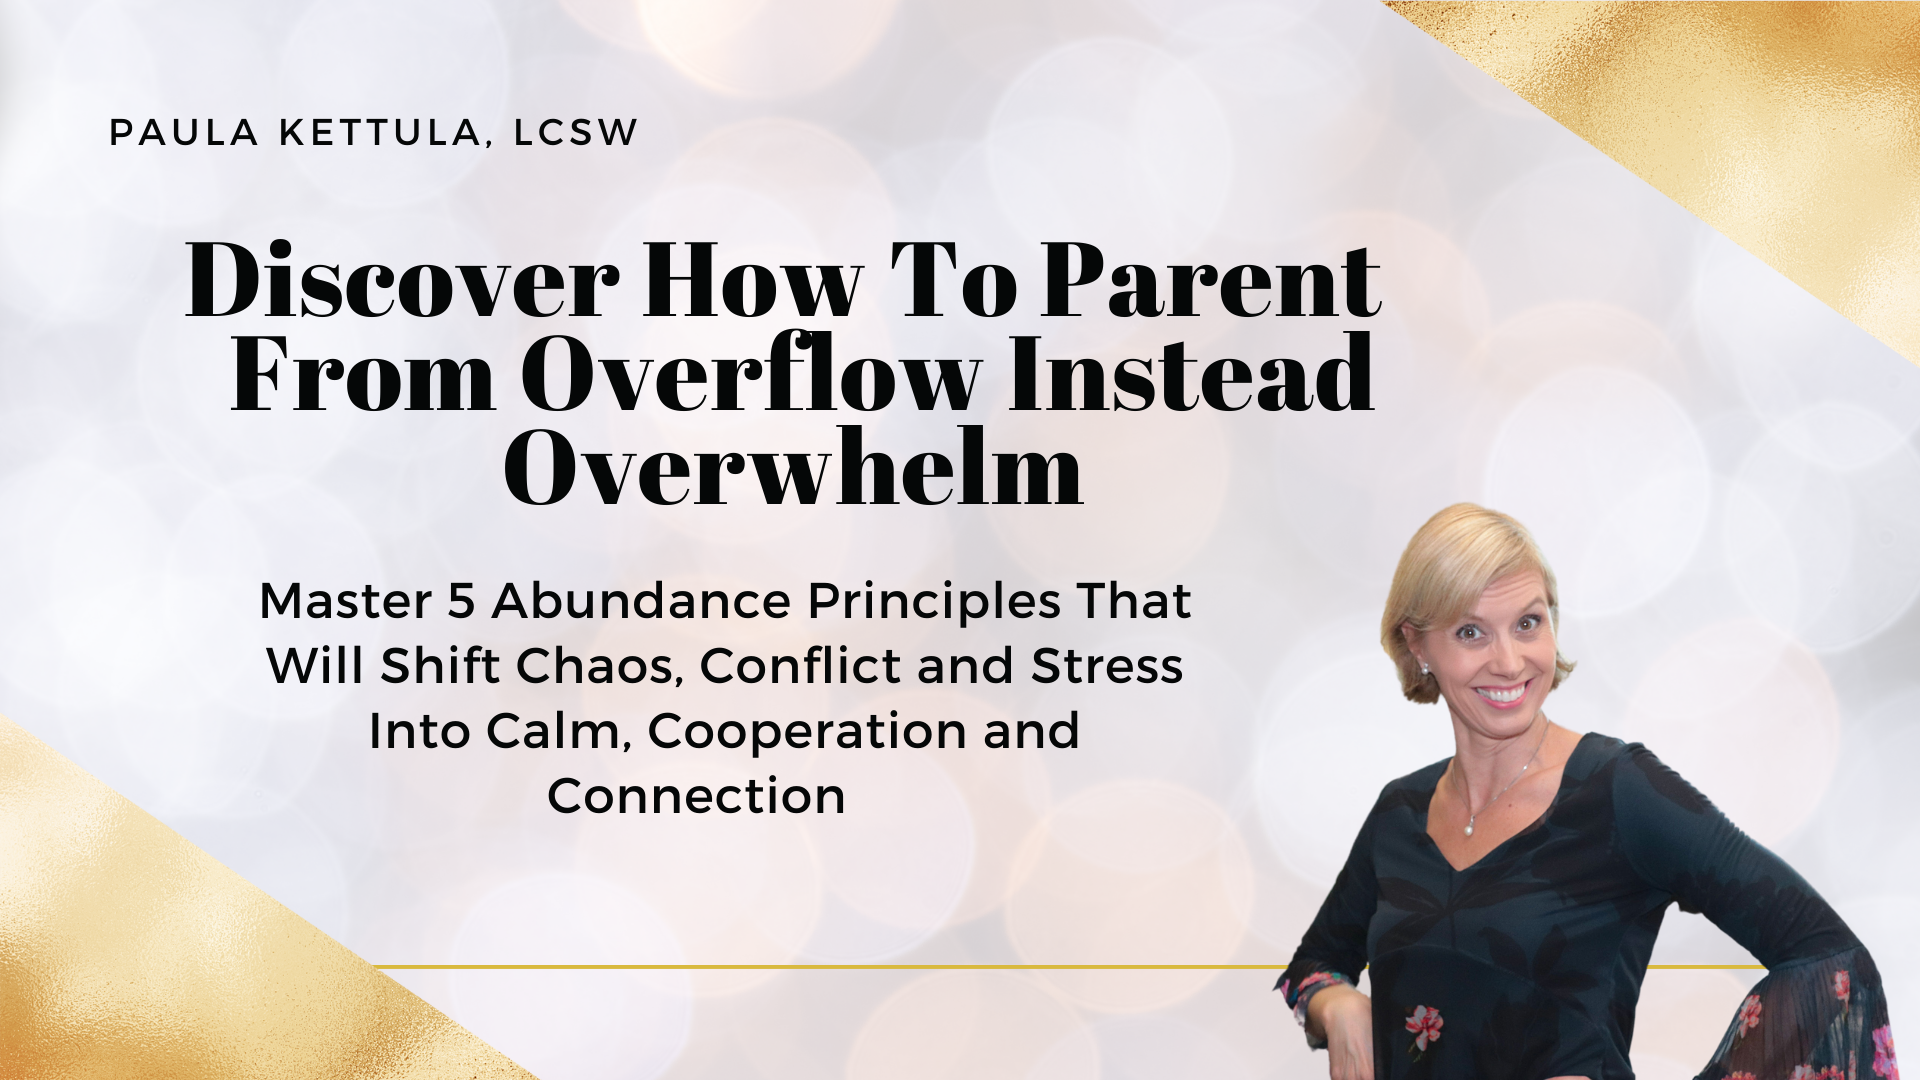 Transformational Parenting - Discover How To Parent From Overflow Instead Overwhelm